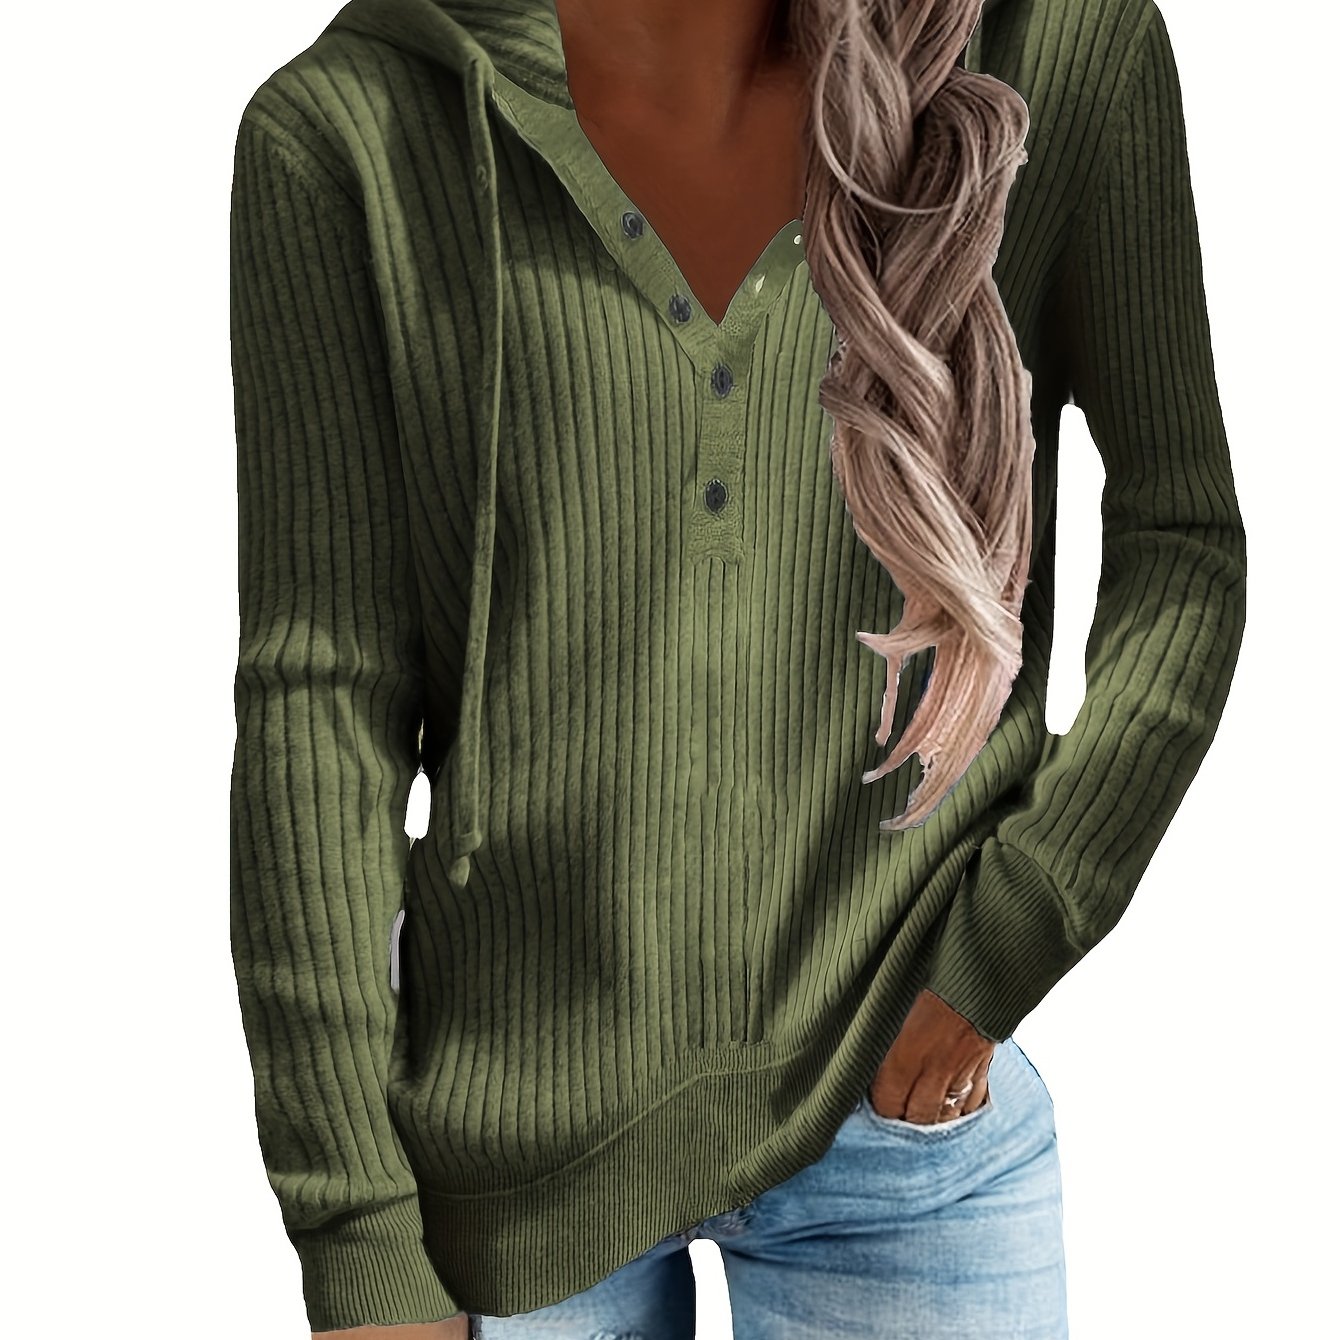 Plus Size Casual Coat, Women's Plus Solid Ribbed Long Sleeve Drawstring Hoodie Button Up Coat Army Green